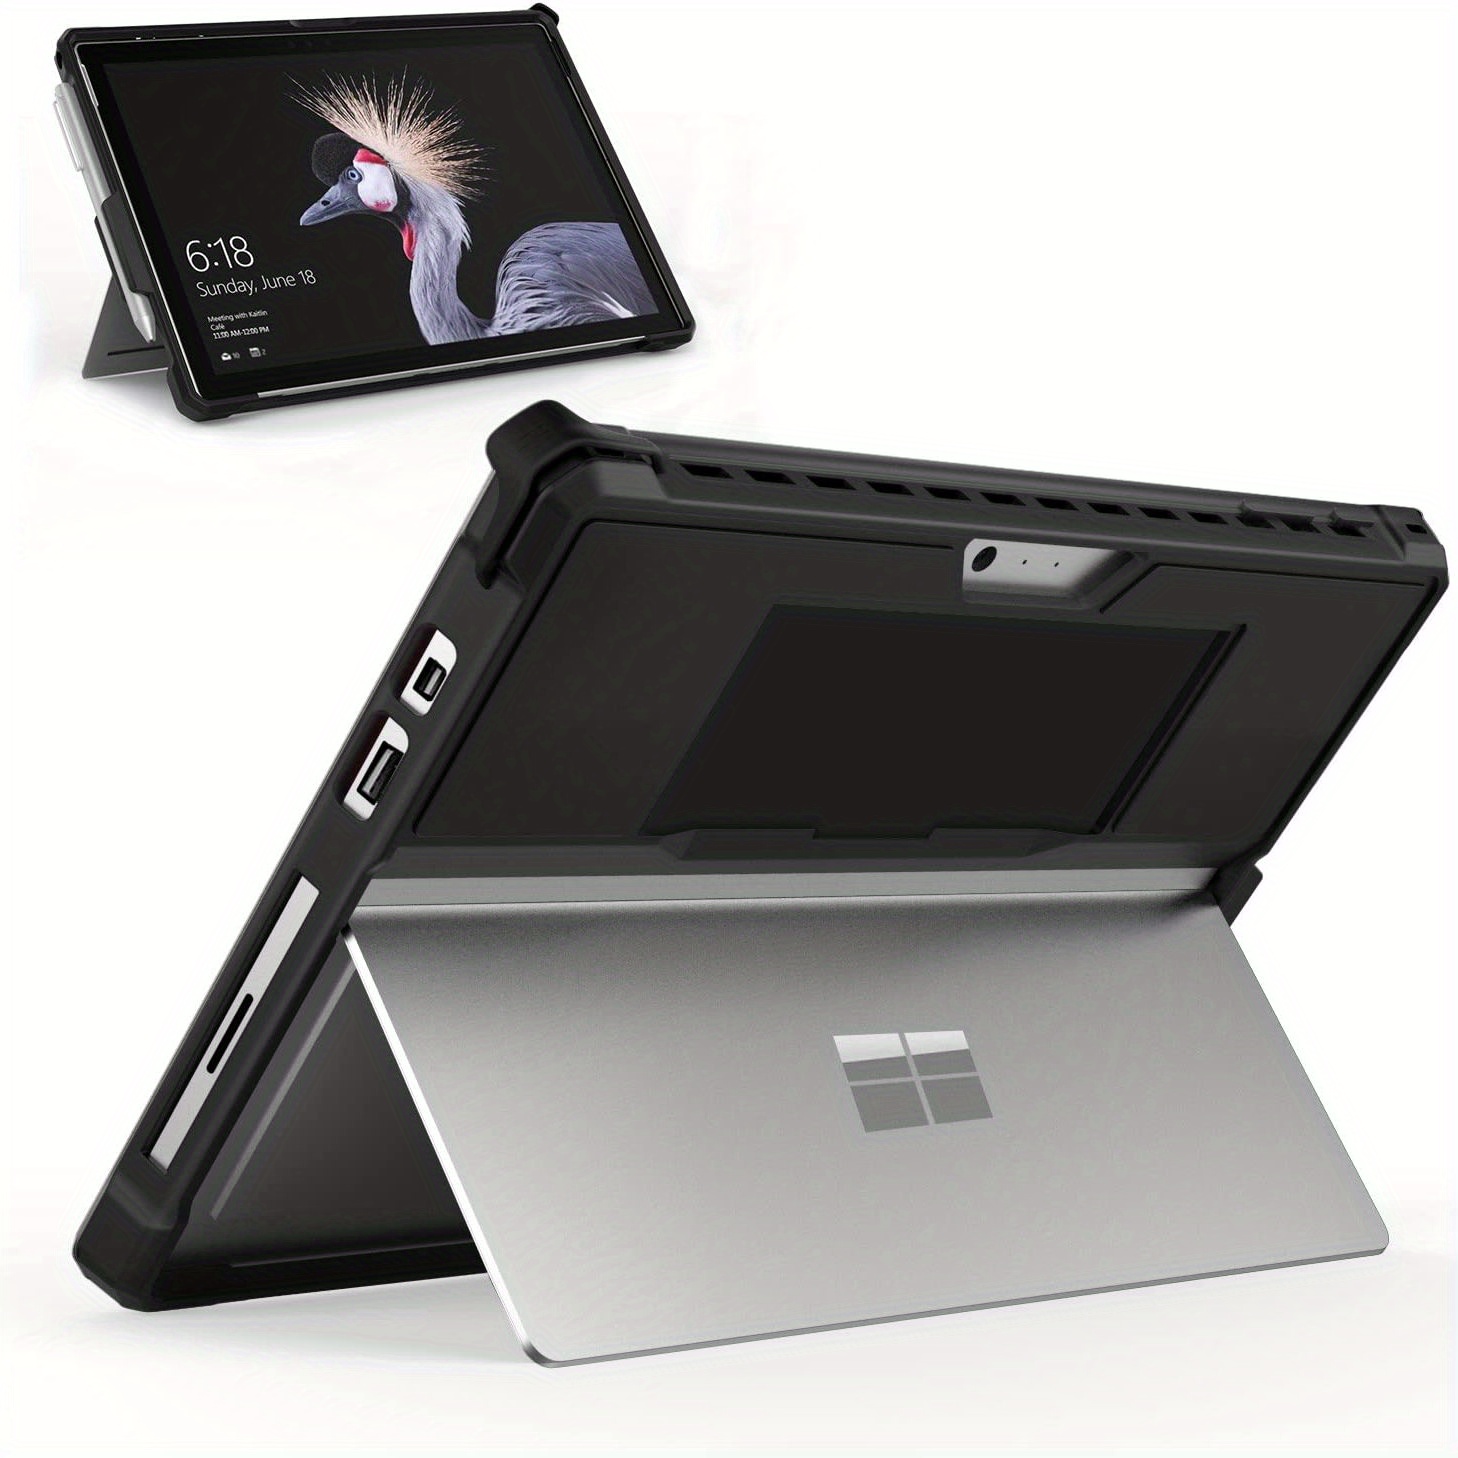 Microsoft Surface Pro 4 Tablet Computer